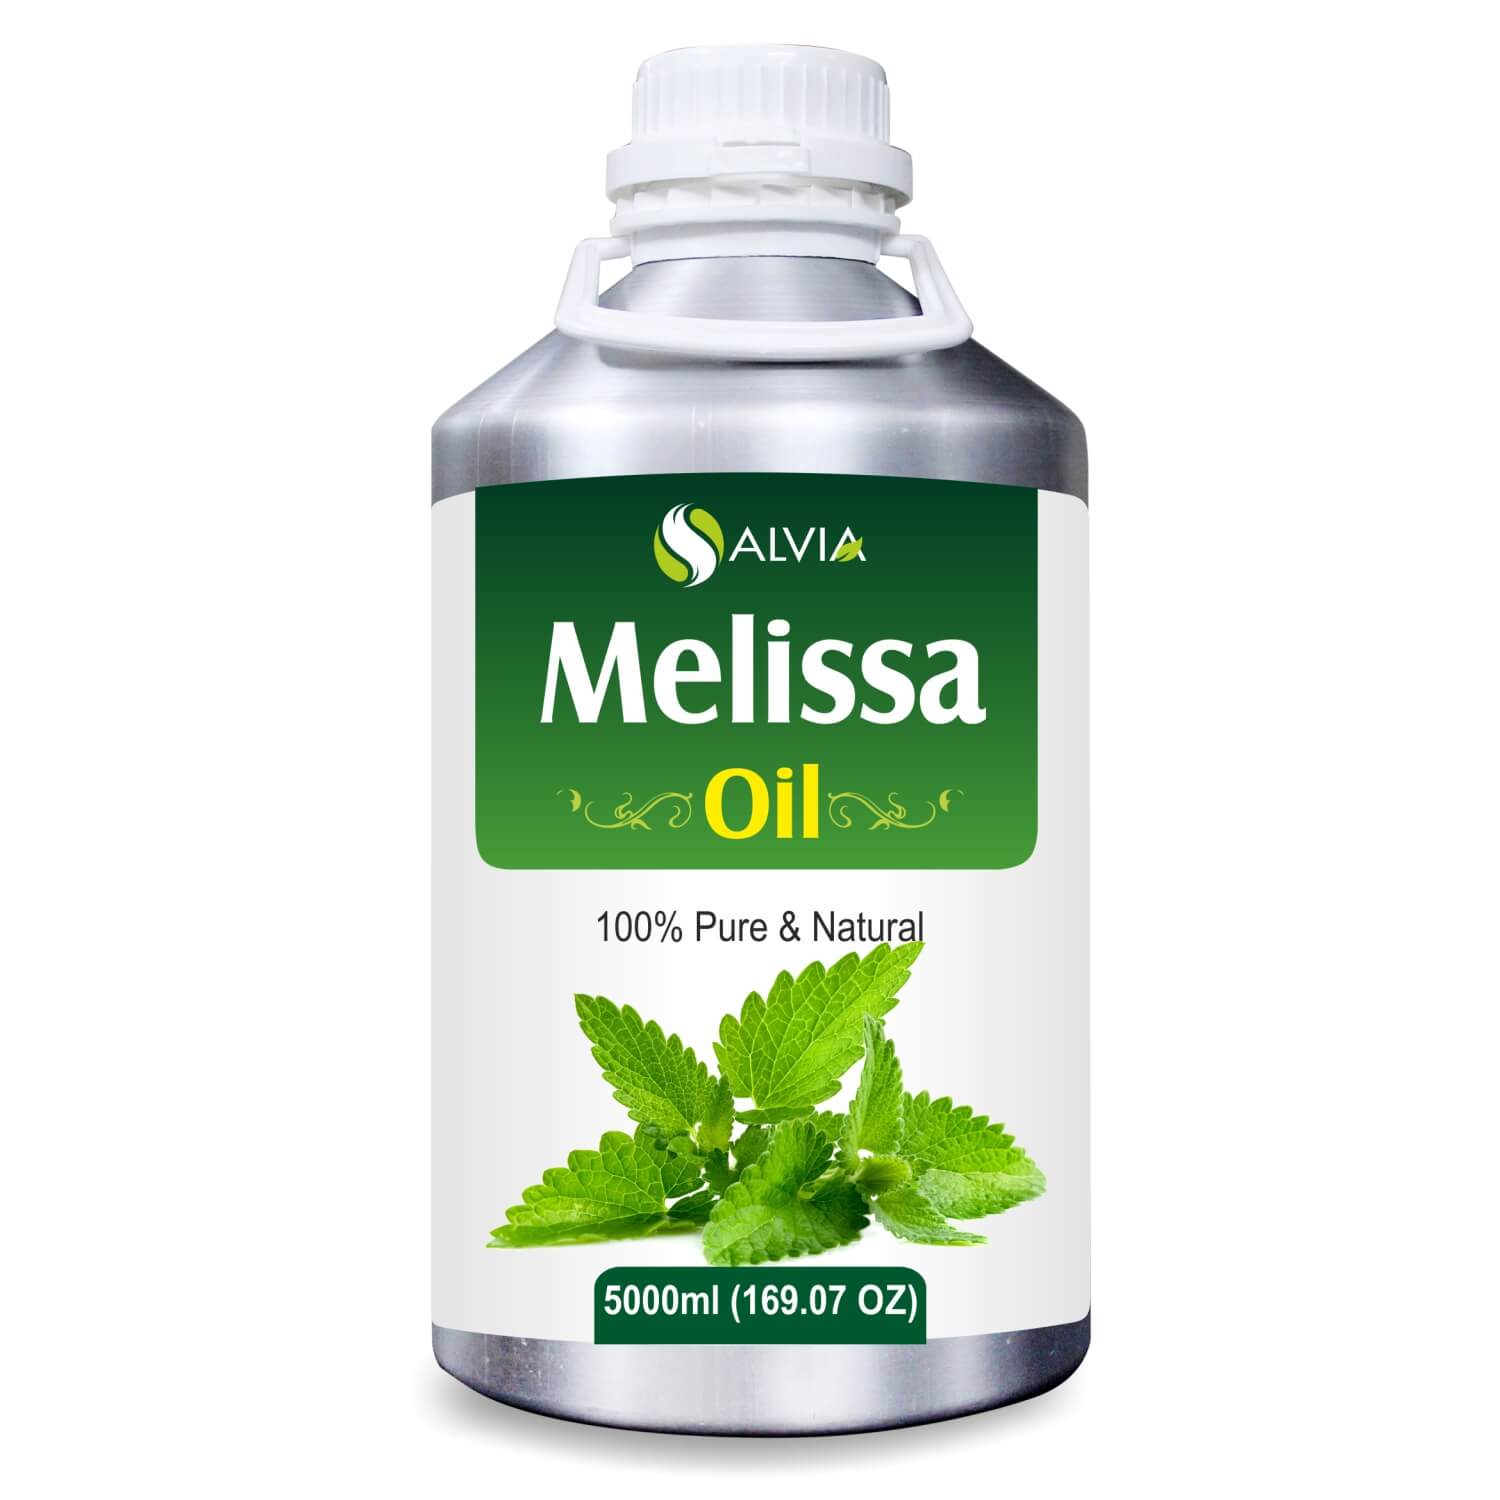 Salvia Natural Essential Oils 5000ml Melissa Oil (Melissa-Officinalis) Pure Essential Oil Moisturizes & Cleanses Skin, Lightens Skin, Soothes Skin Conditions, HairCare Properties, Aromatherapy